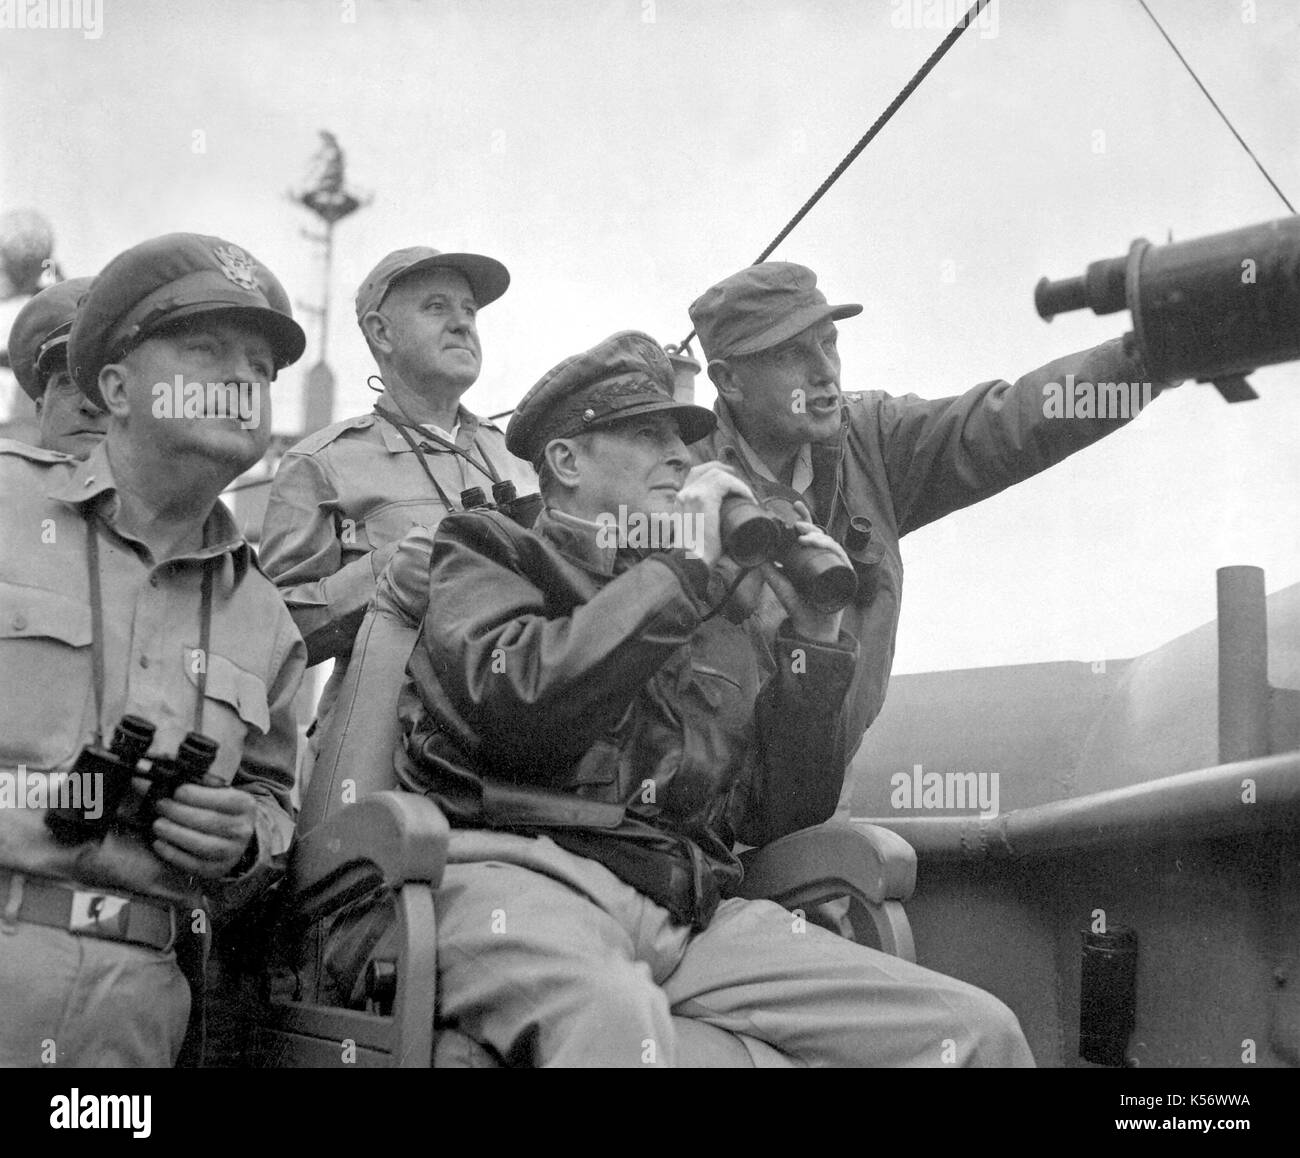 Brigadier General Courtney Whitney, government section, Far East Command; General Douglas MacArthur, Commander-in-Chief, United Nations Command, and Major General Edward Almond (at right, pointing), Commanding General, X Corps in Korea, observe the shelling of Incheon from the USS Mount McKinley. Stock Photo